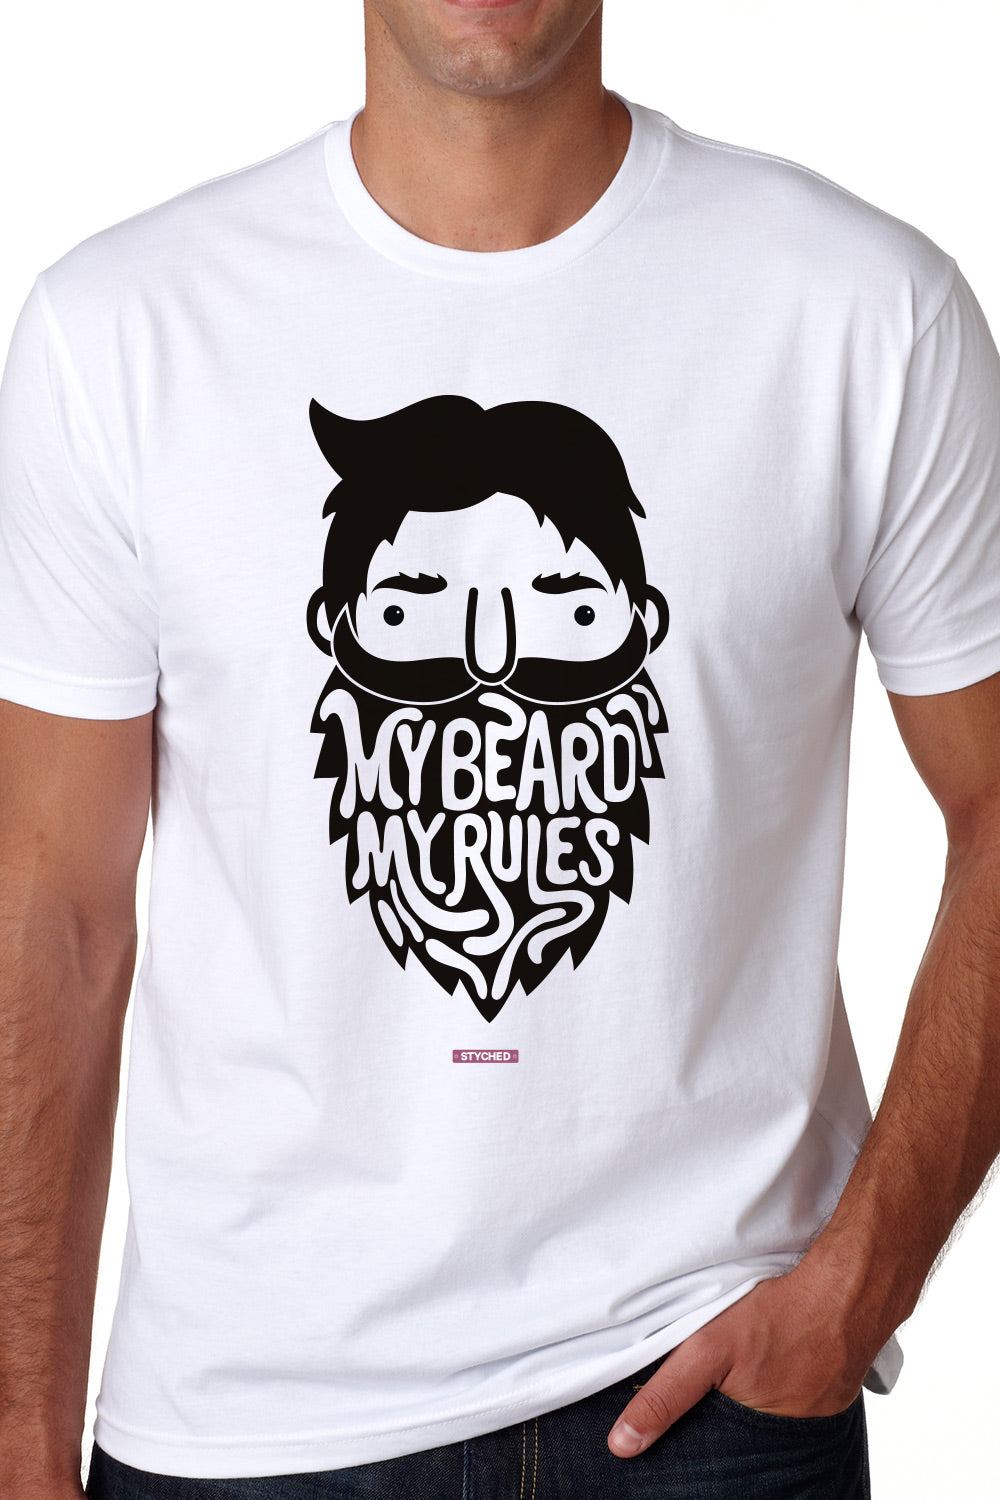 My Beard My Rules - Graphic T-Shirt White Color